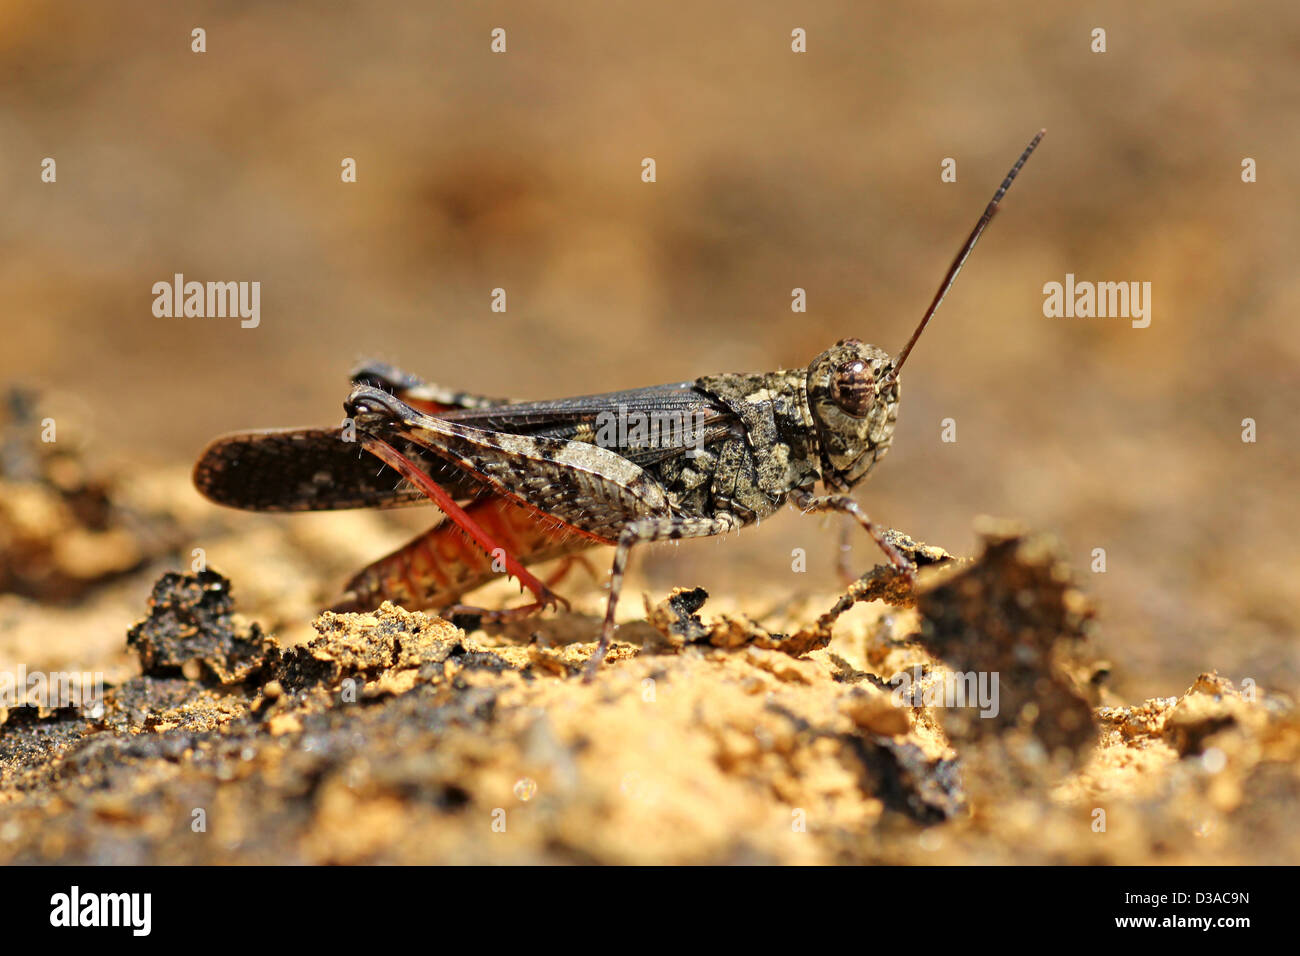 Camouflaged Grasshopper With Contrasting Red Abdomen Stock Photo